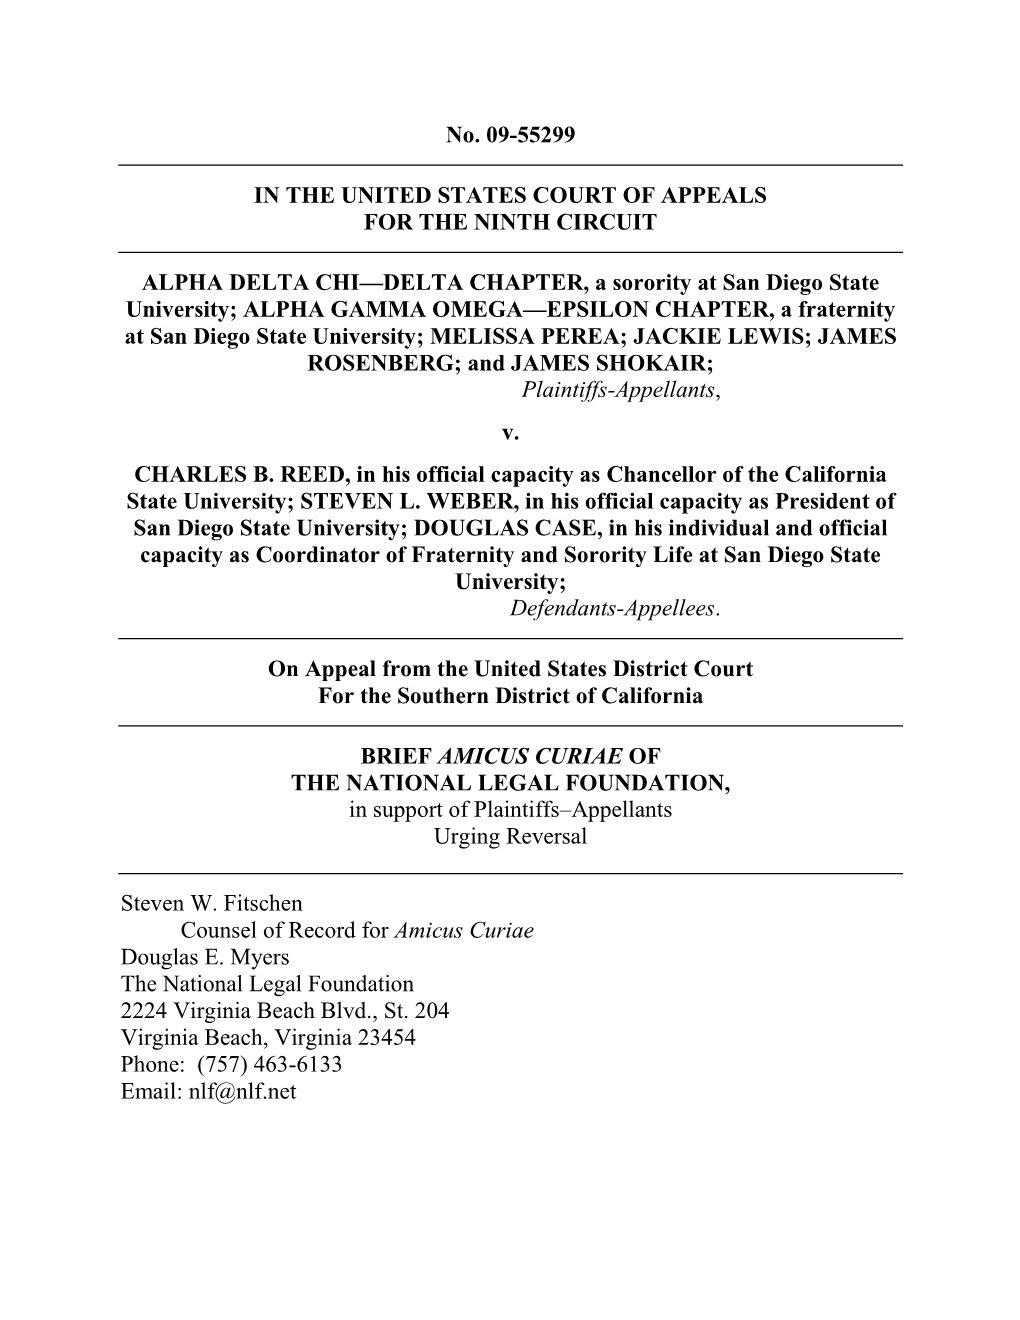 No. 09-55299 in the UNITED STATES COURT of APPEALS